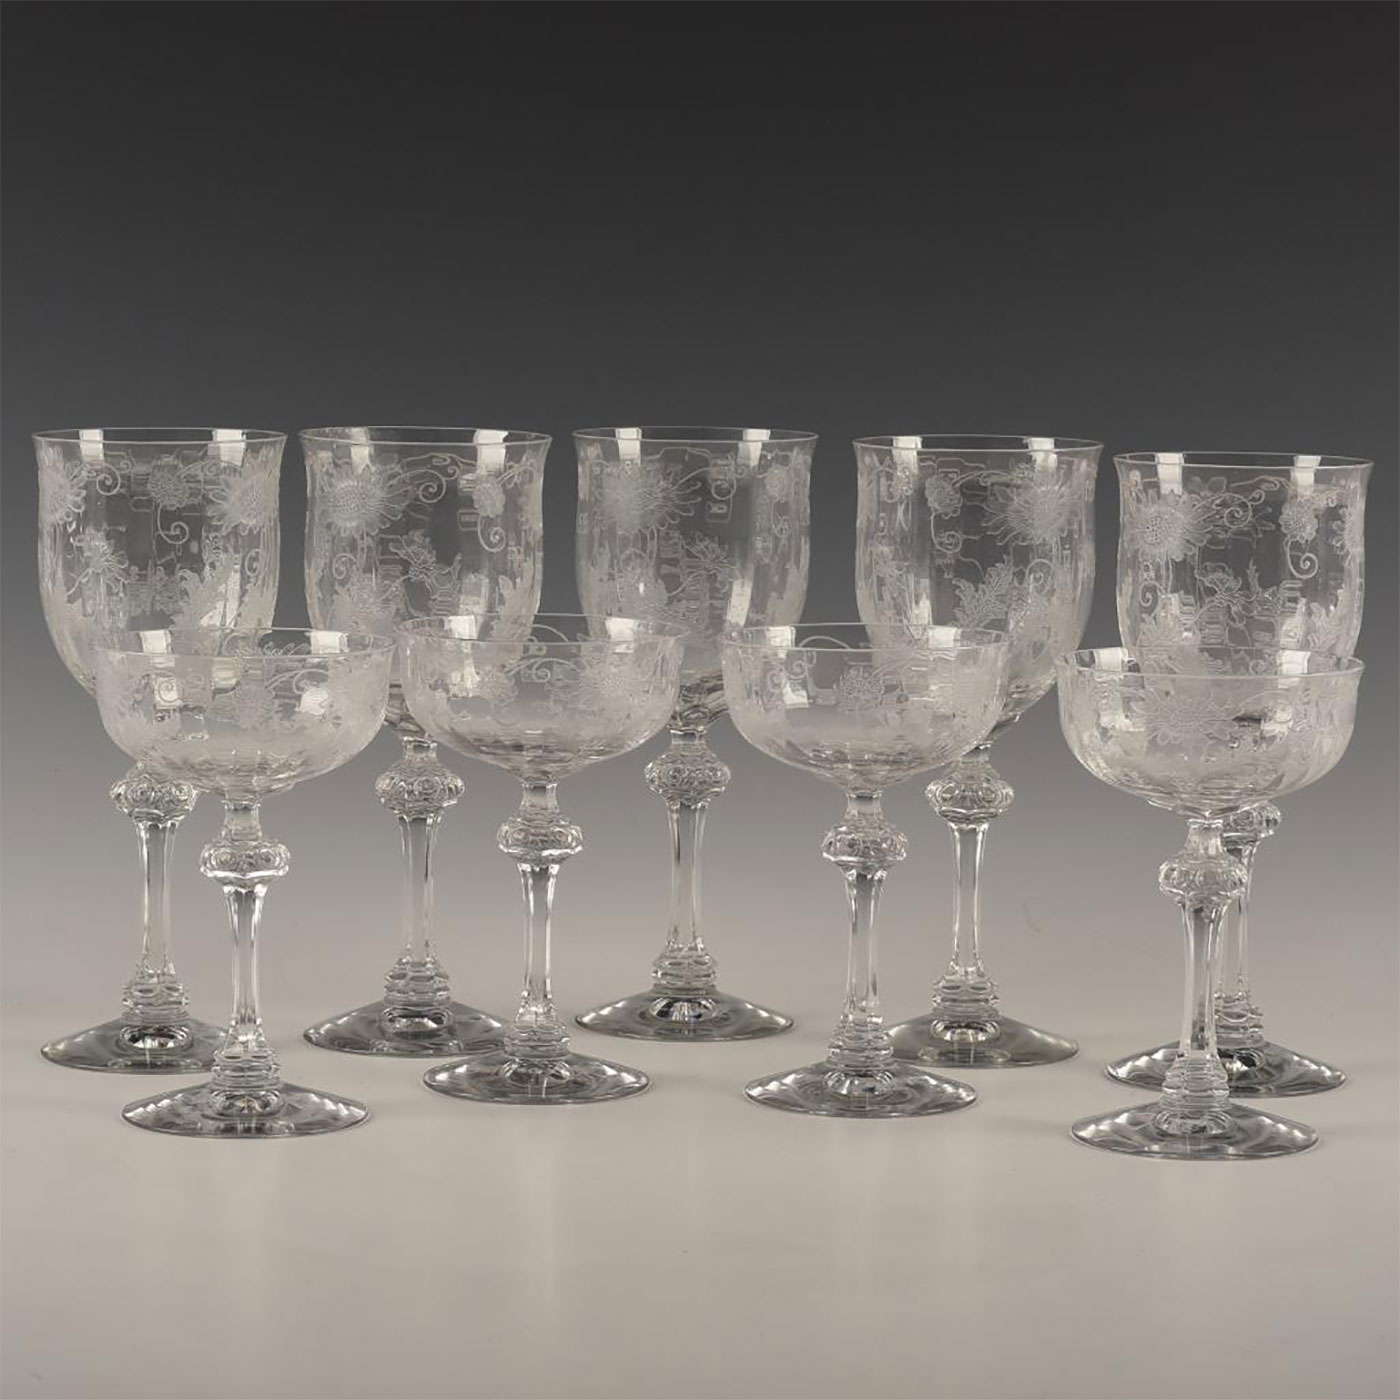 SET OF 5 WINE GLASSES, 4 GOBLETS, AND DUCK AERATOR - Image 5 of 9